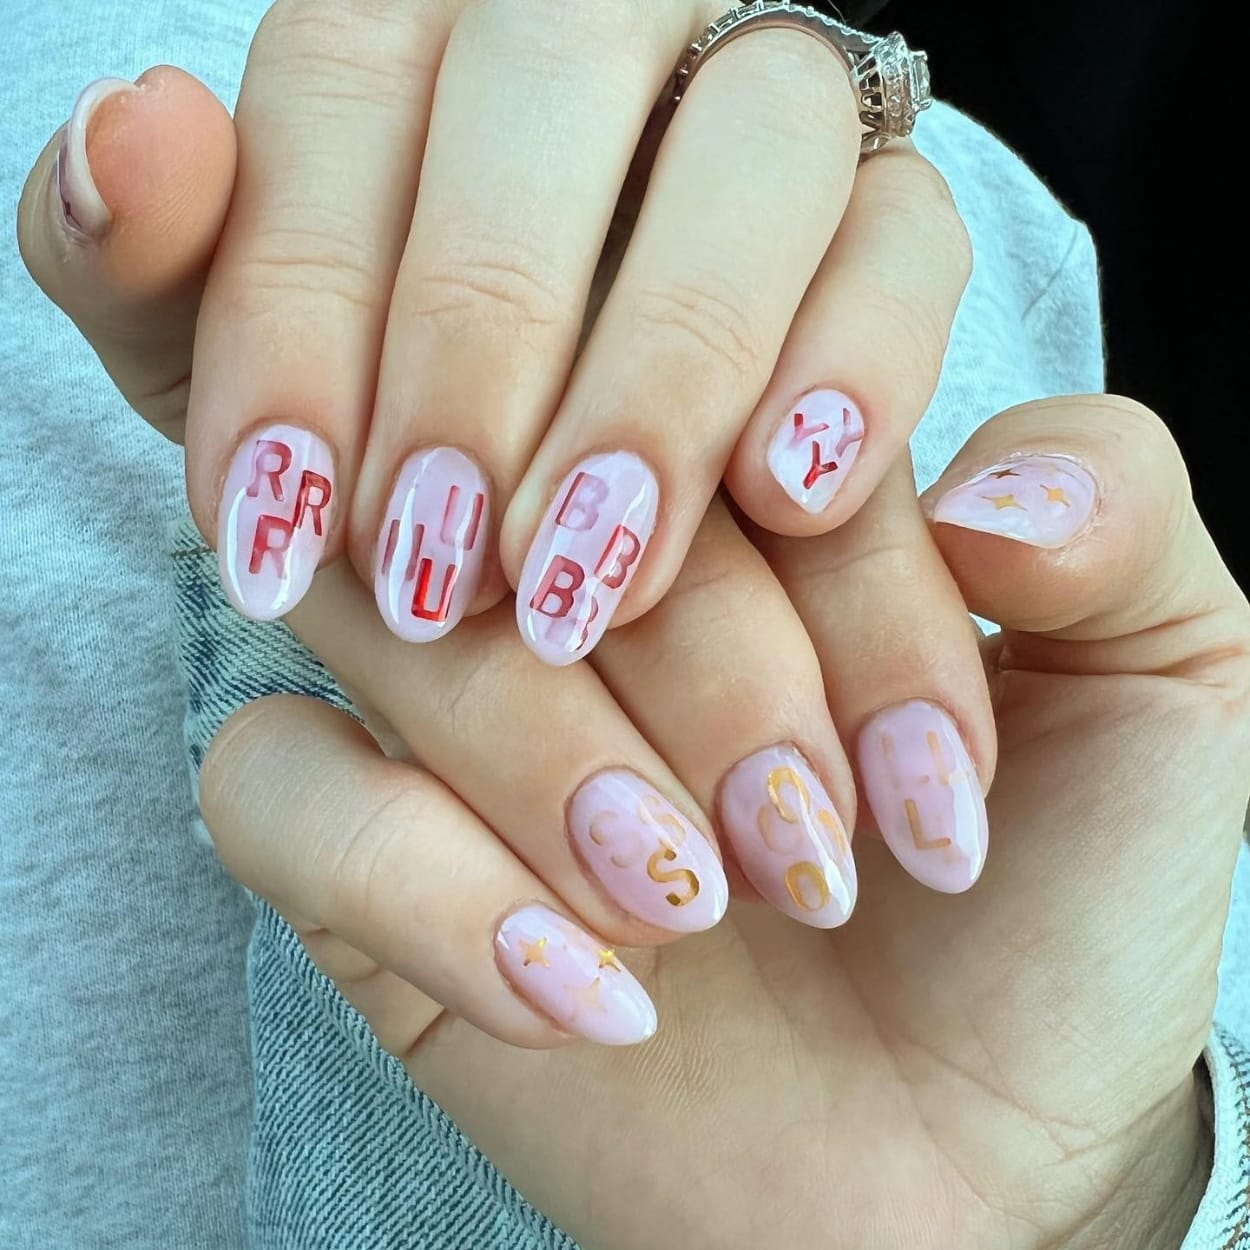 Nails with overlapping letters